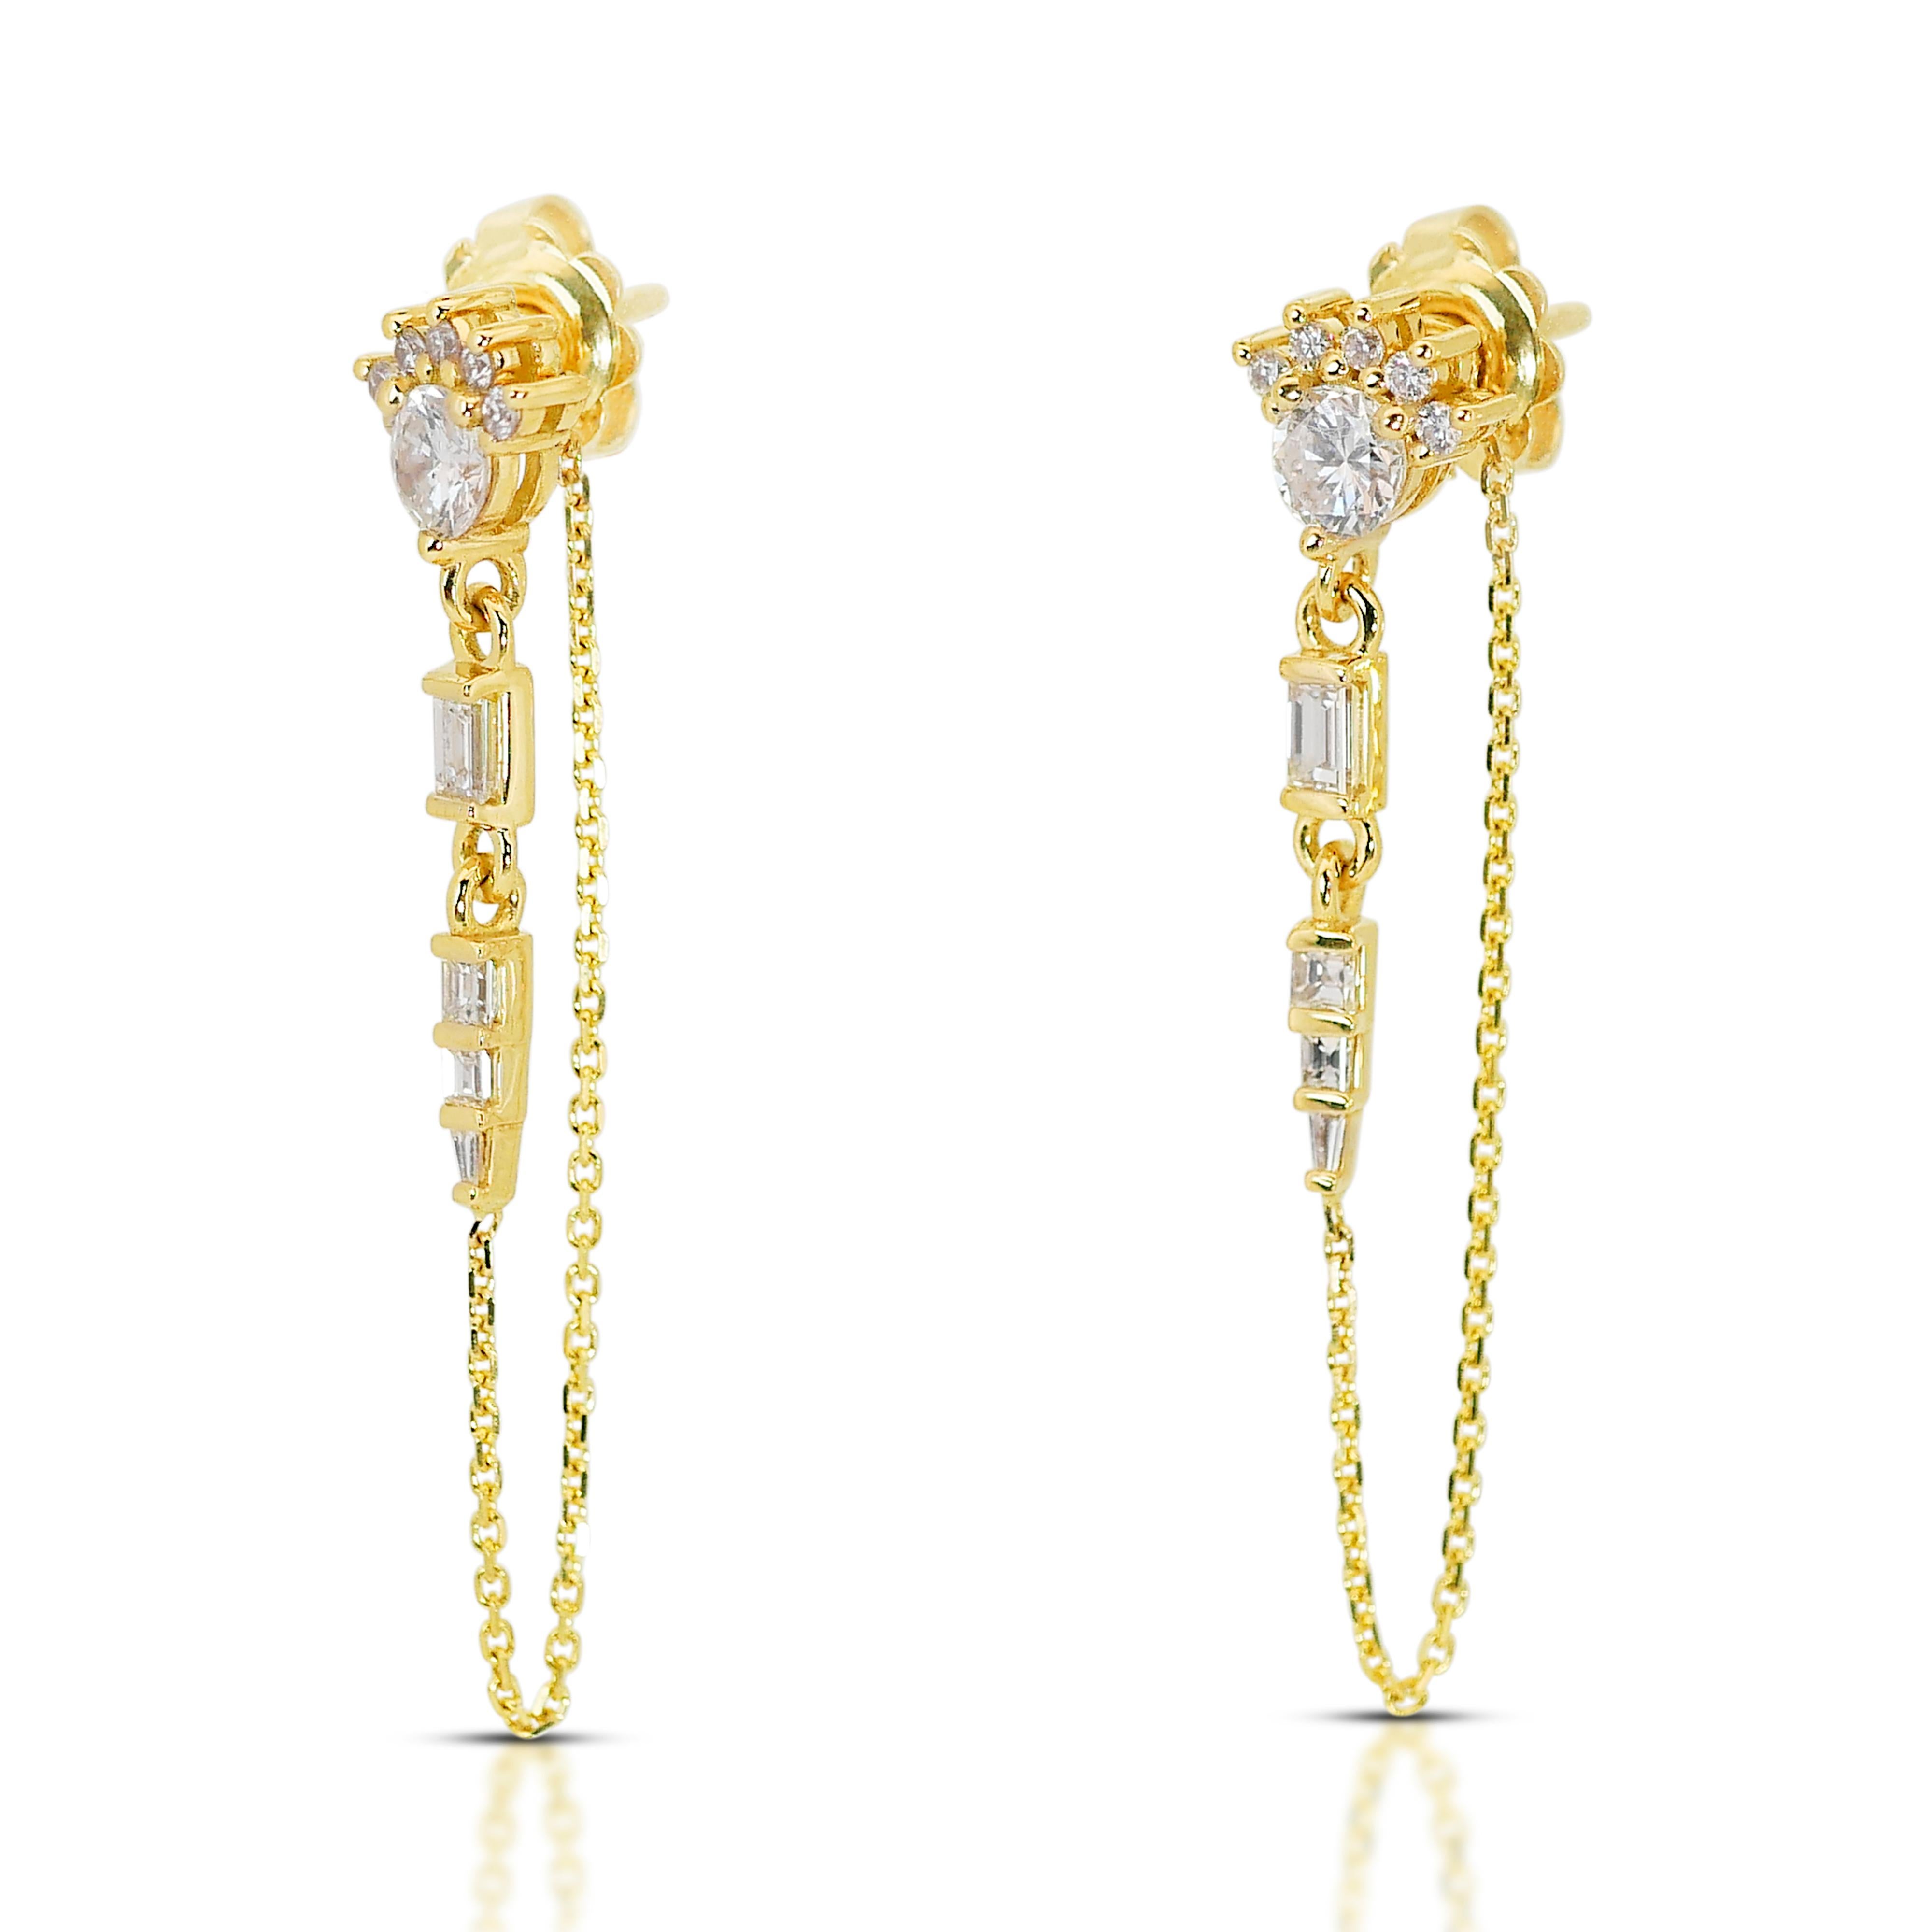 Fascinating 18K Yellow Gold Diamond Drop Earrings with 1.19ct - IGI Certified In New Condition For Sale In רמת גן, IL